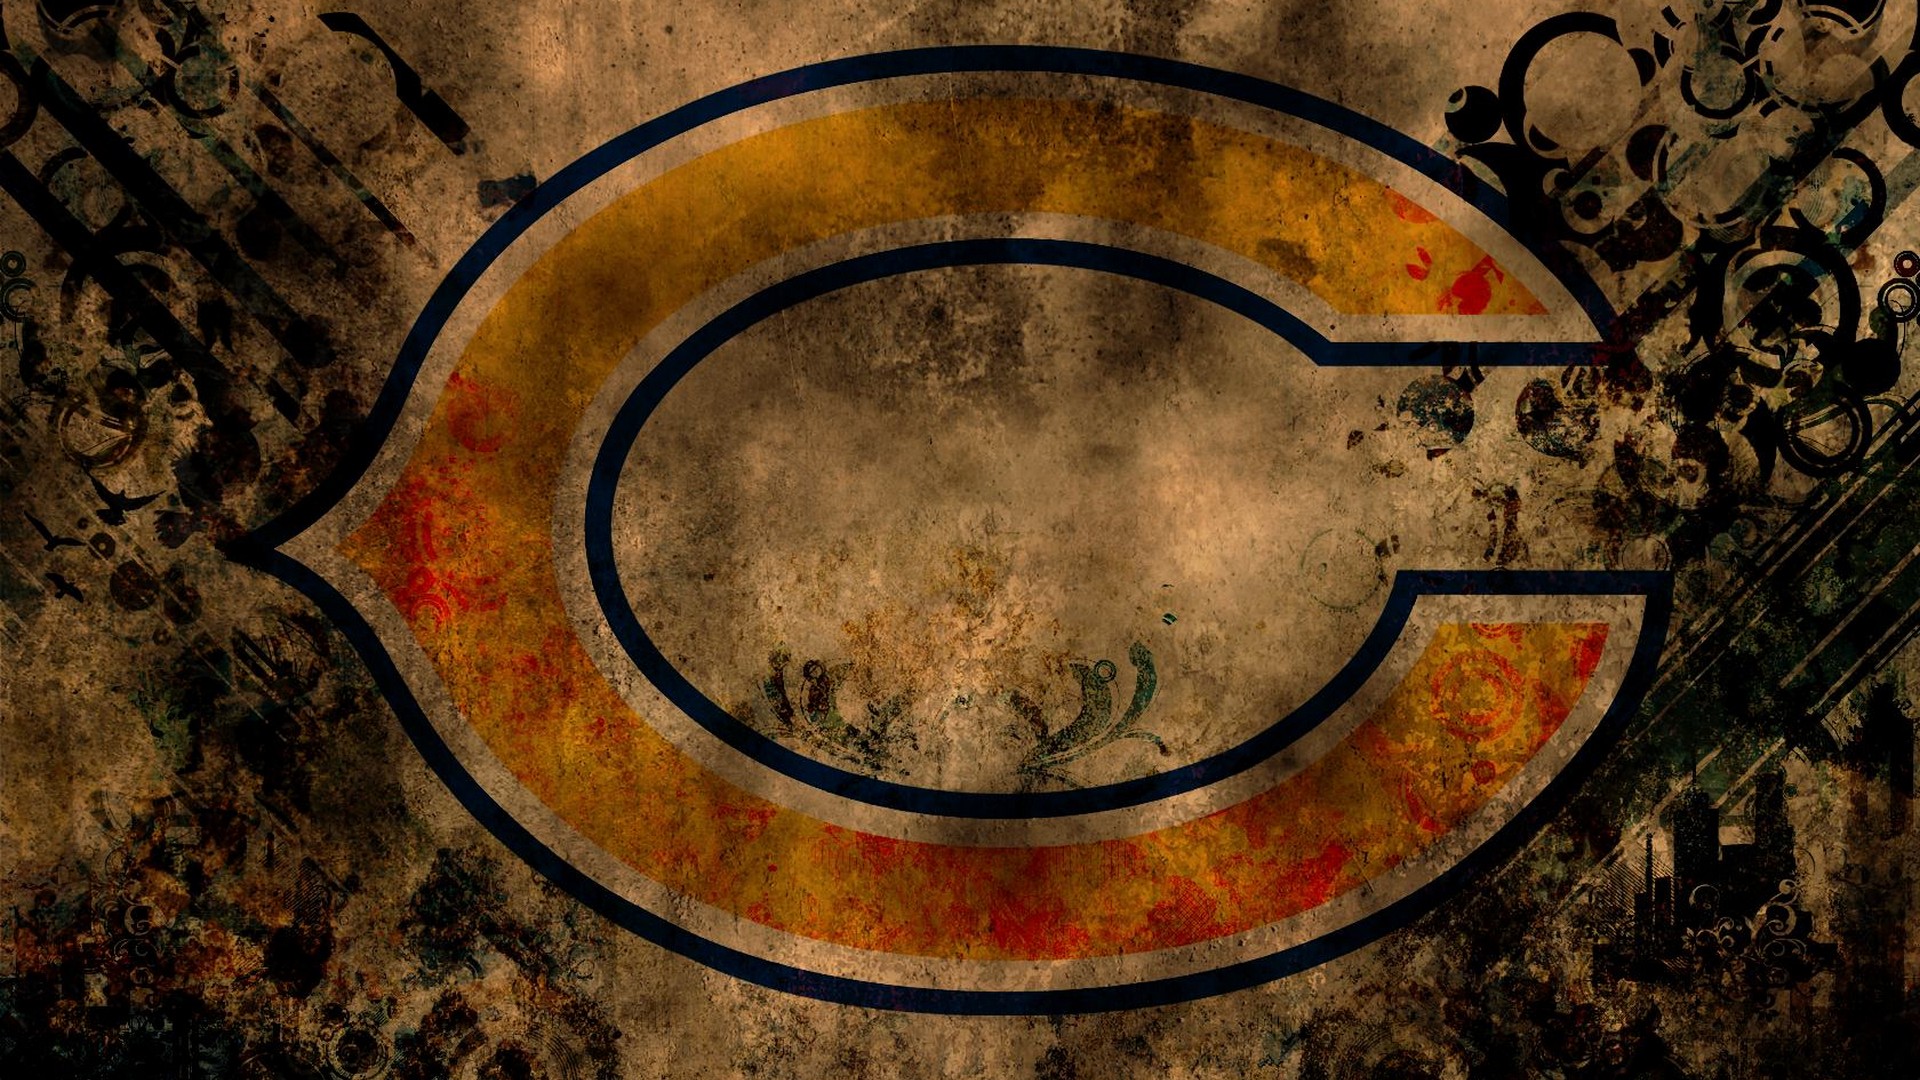 HD Backgrounds Chicago Bears NFL With high-resolution 1920X1080 pixel. You can use this wallpaper for your Mac or Windows Desktop Background, iPhone, Android or Tablet and another Smartphone device